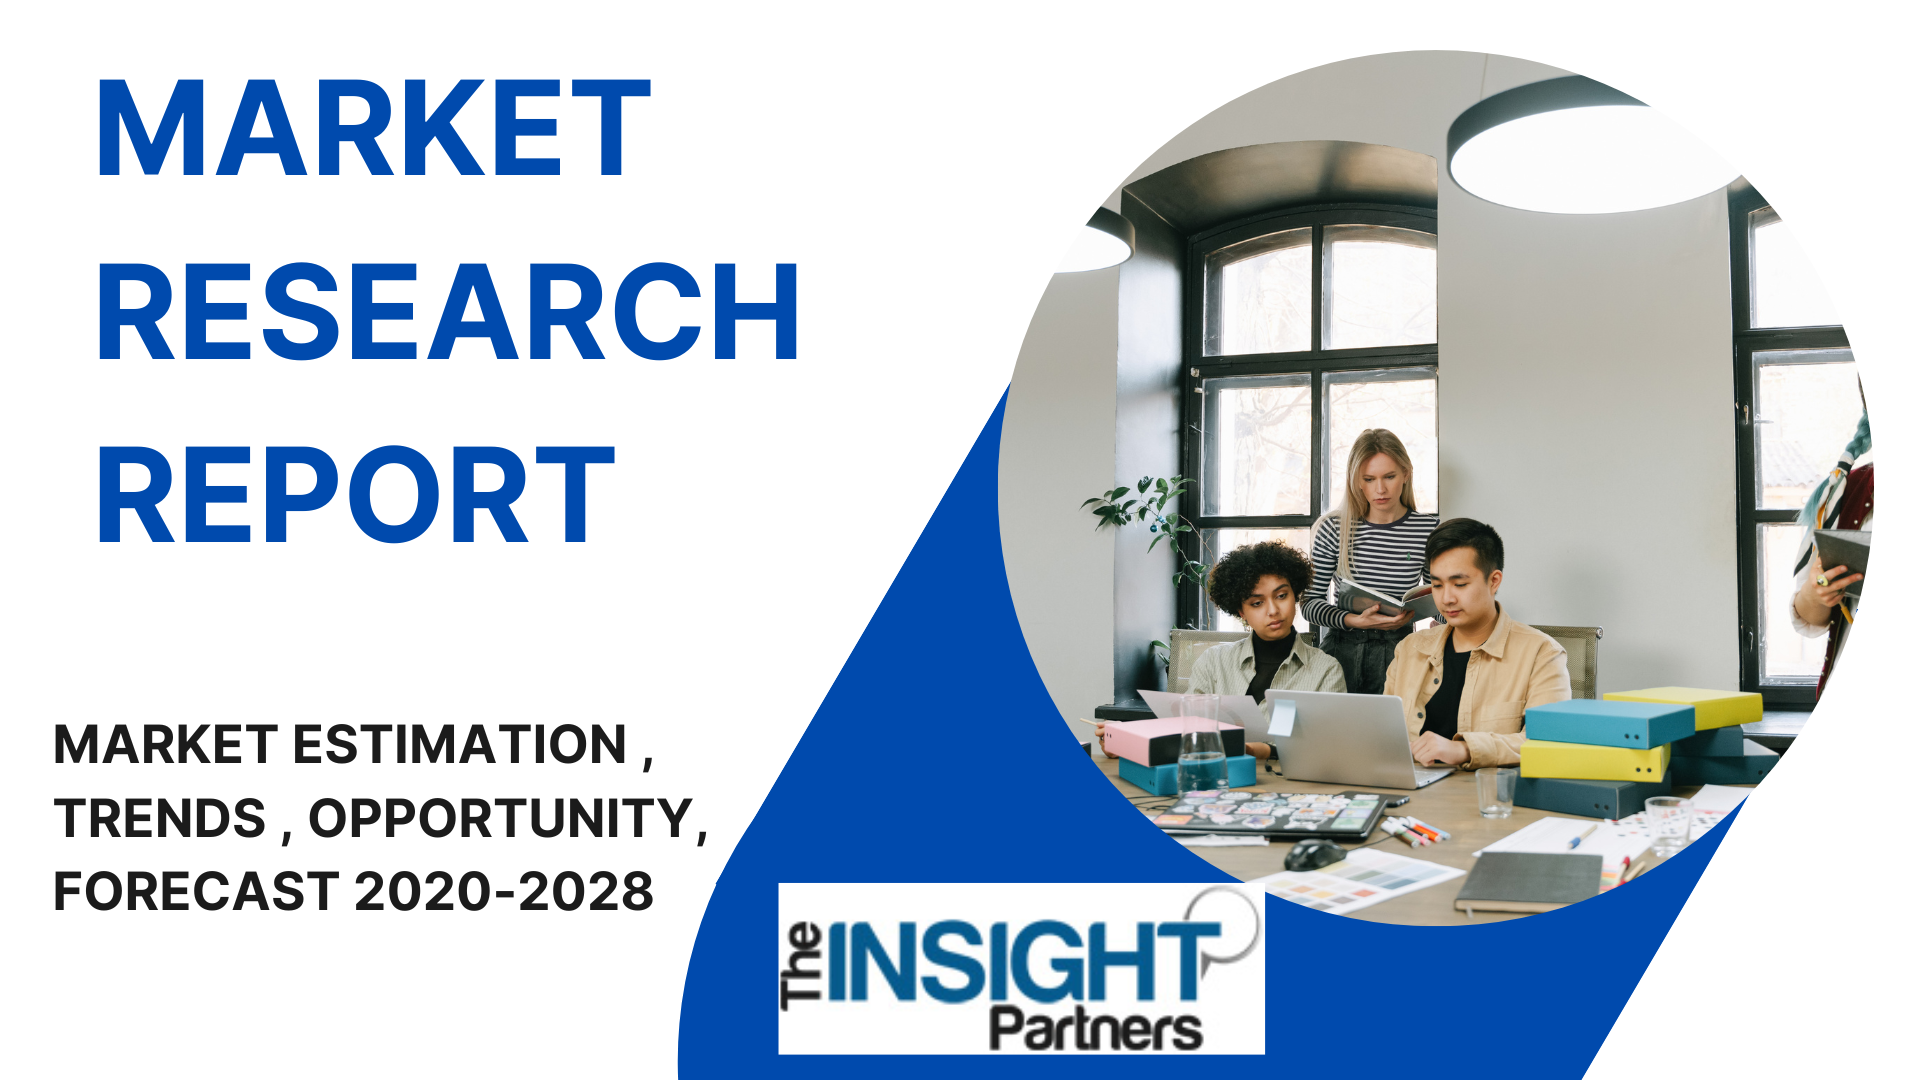 Natural Food and Drinks Market Forecast Growth Opportunities, Key Players, and Threads Analysis